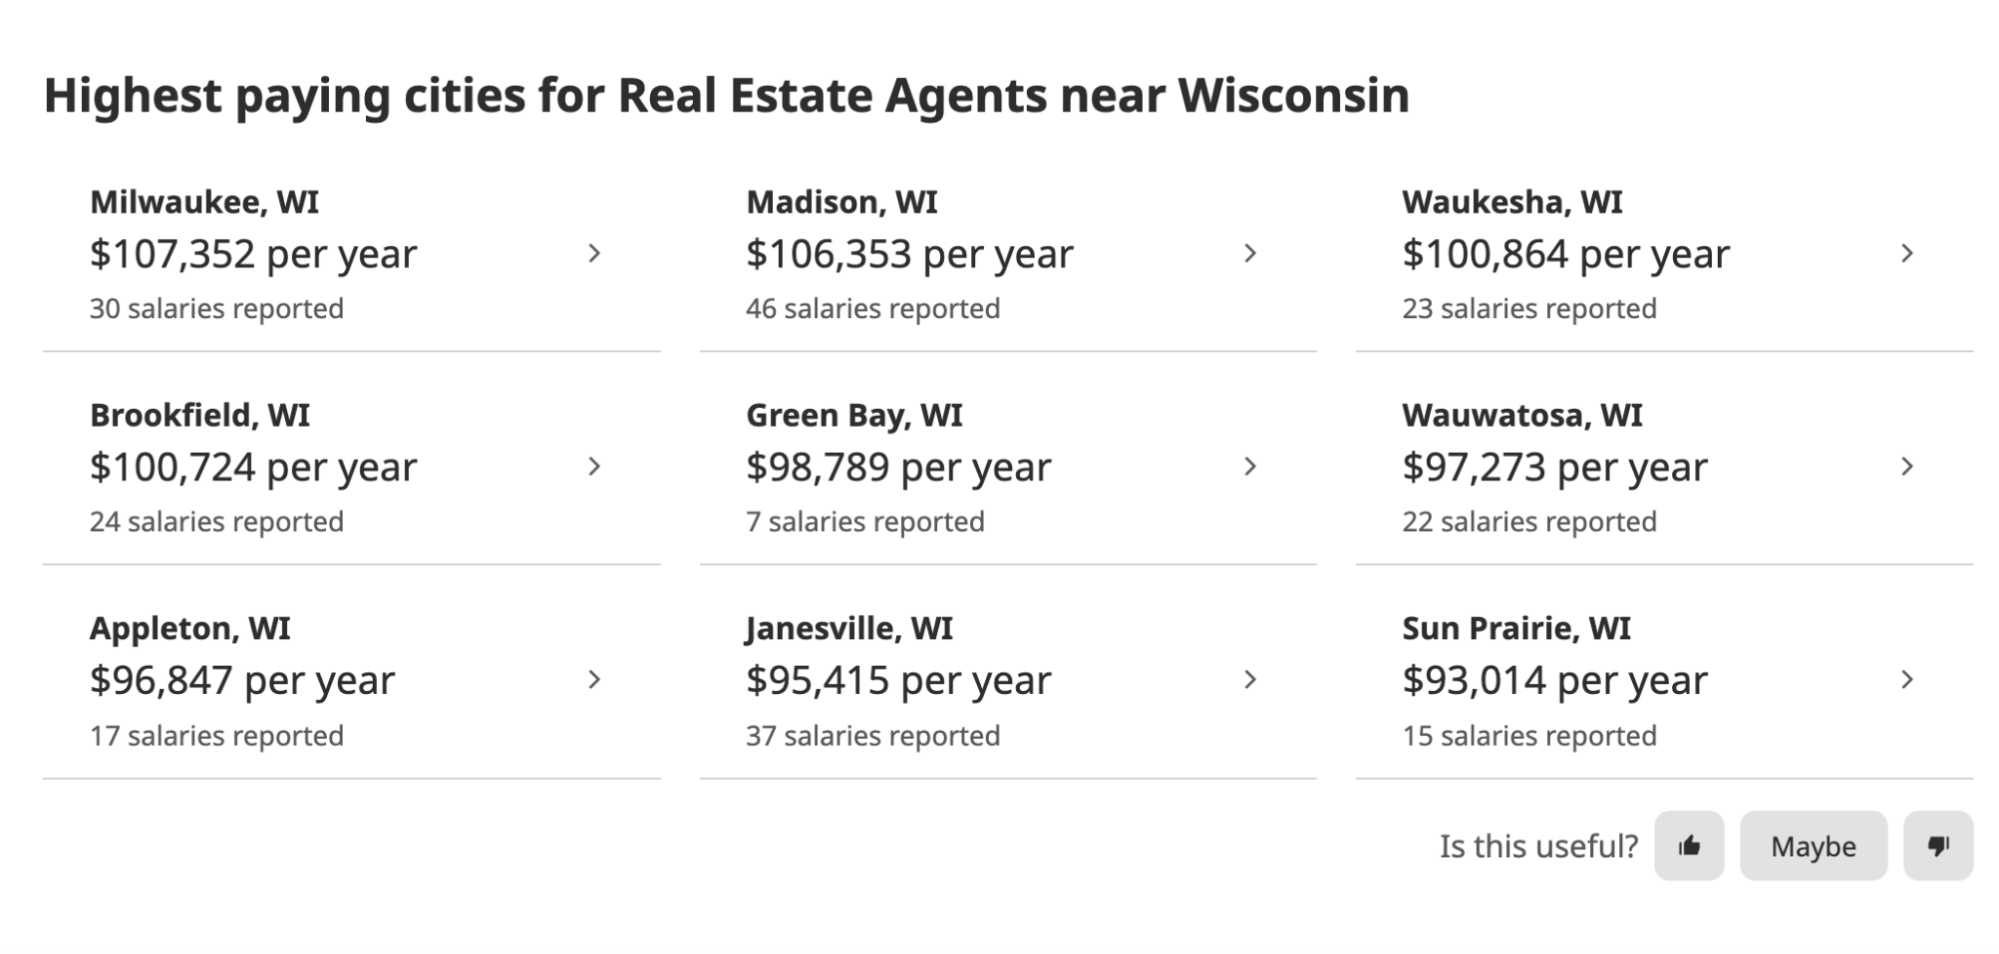 Information for highest paying cities for real estate agent in Wisconsin.